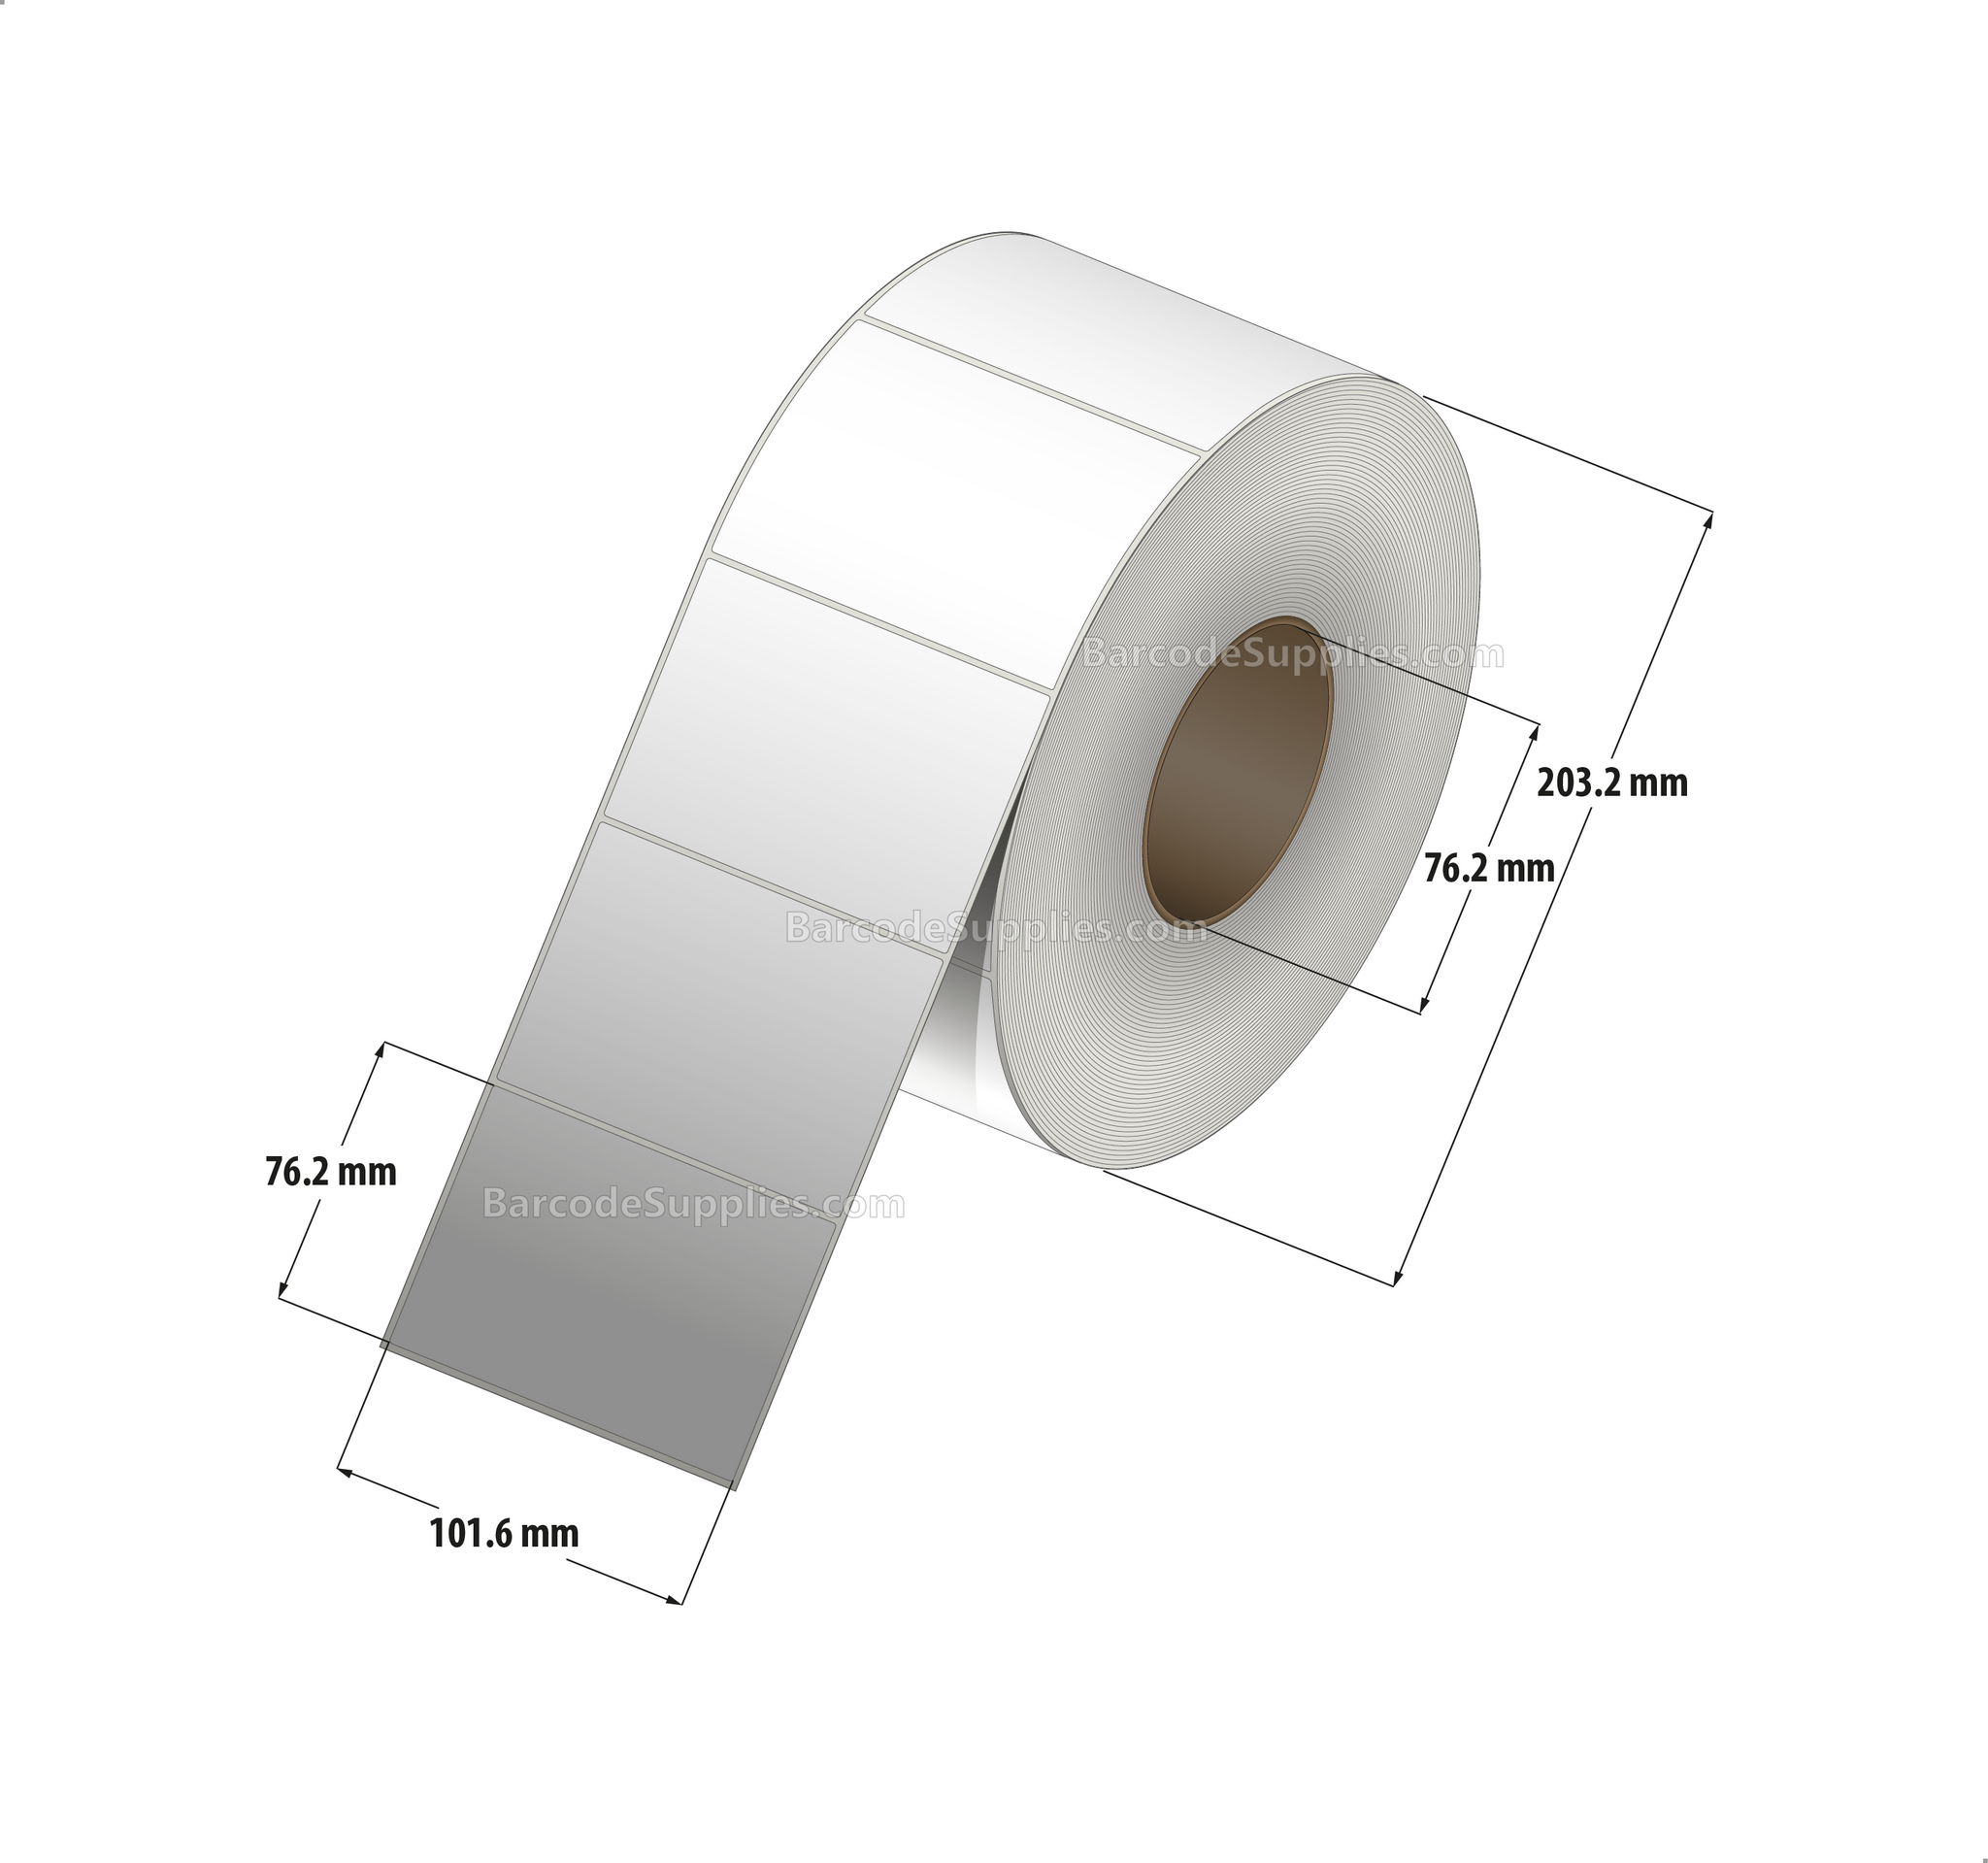 4 x 3 Direct Thermal White Labels With Rubber Adhesive - No Perforation - 2000 Labels Per Roll - Carton Of 4 Rolls - 8000 Labels Total - MPN: DT400300-3